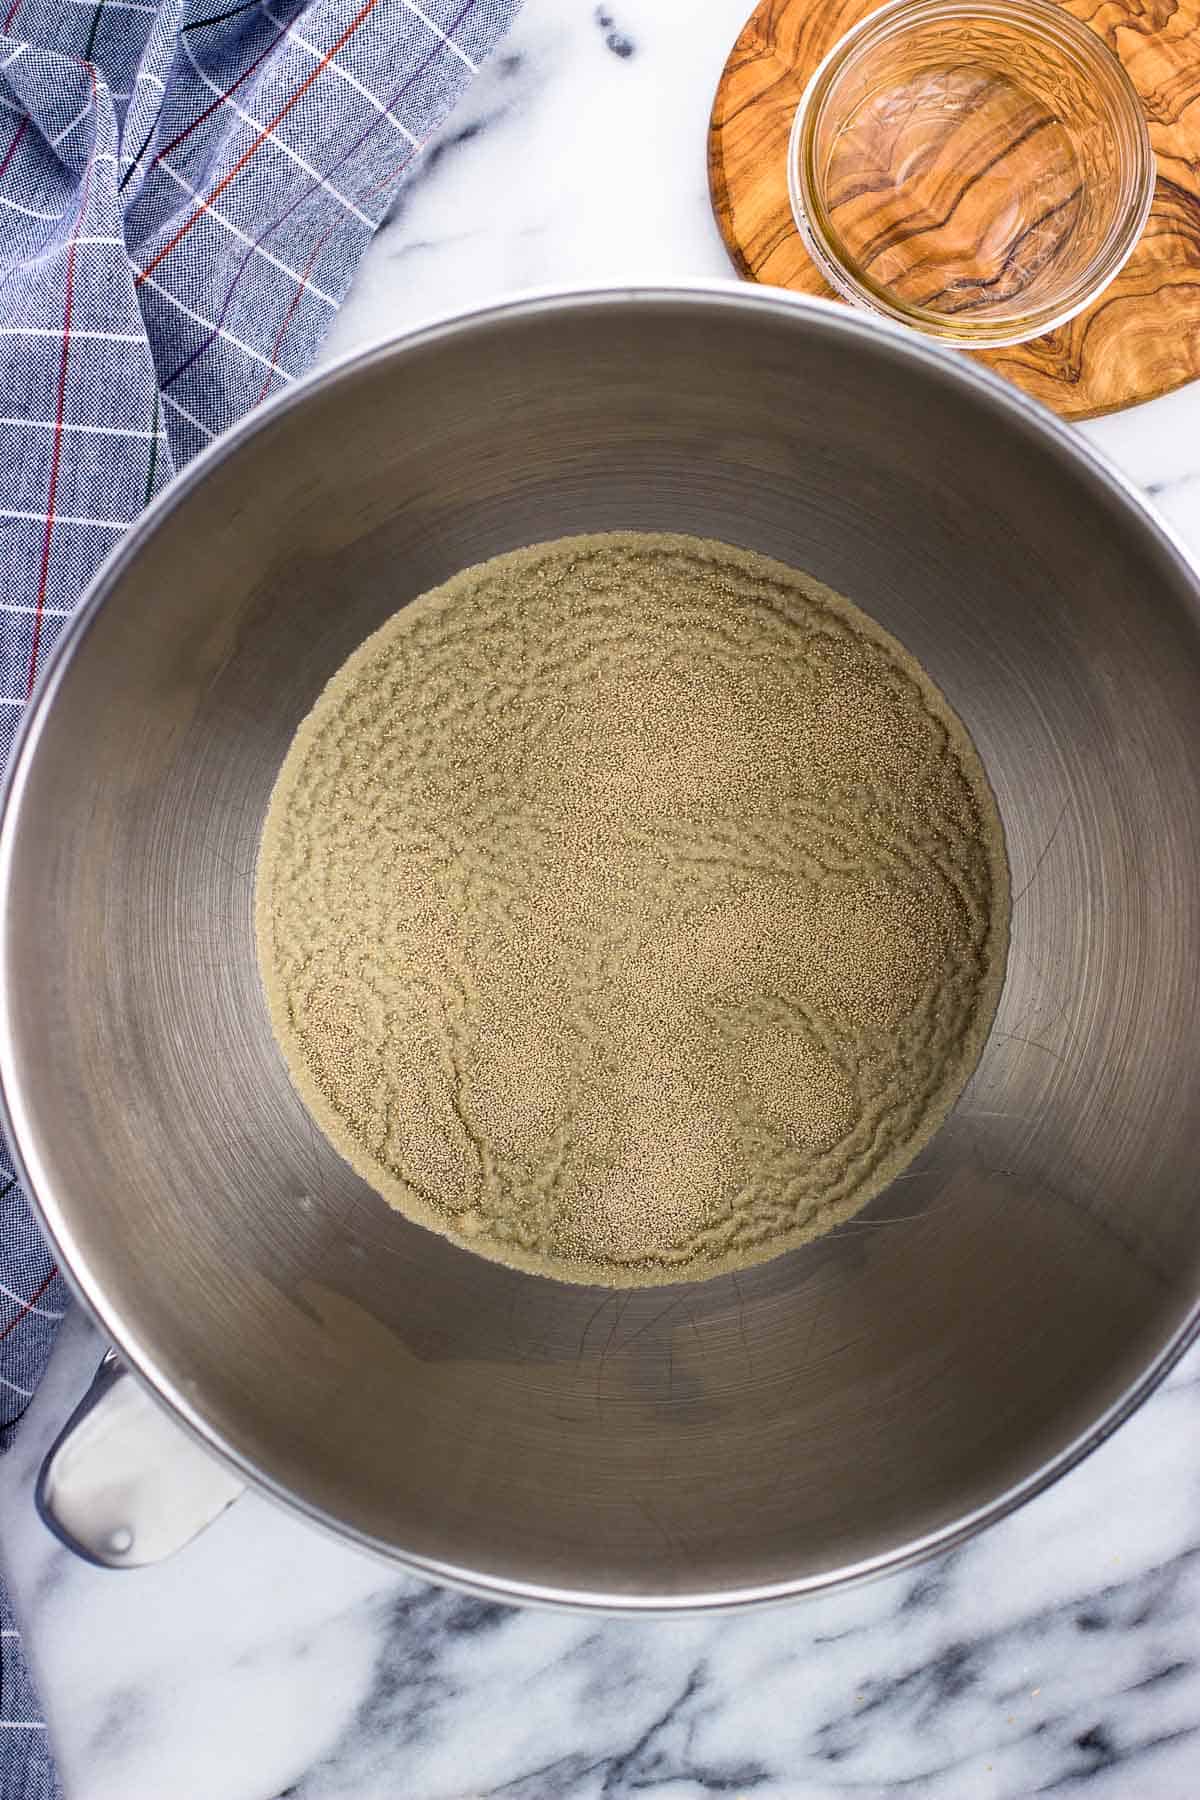 Warm water and sprinkled yeast in a metal stand mixer bowl.